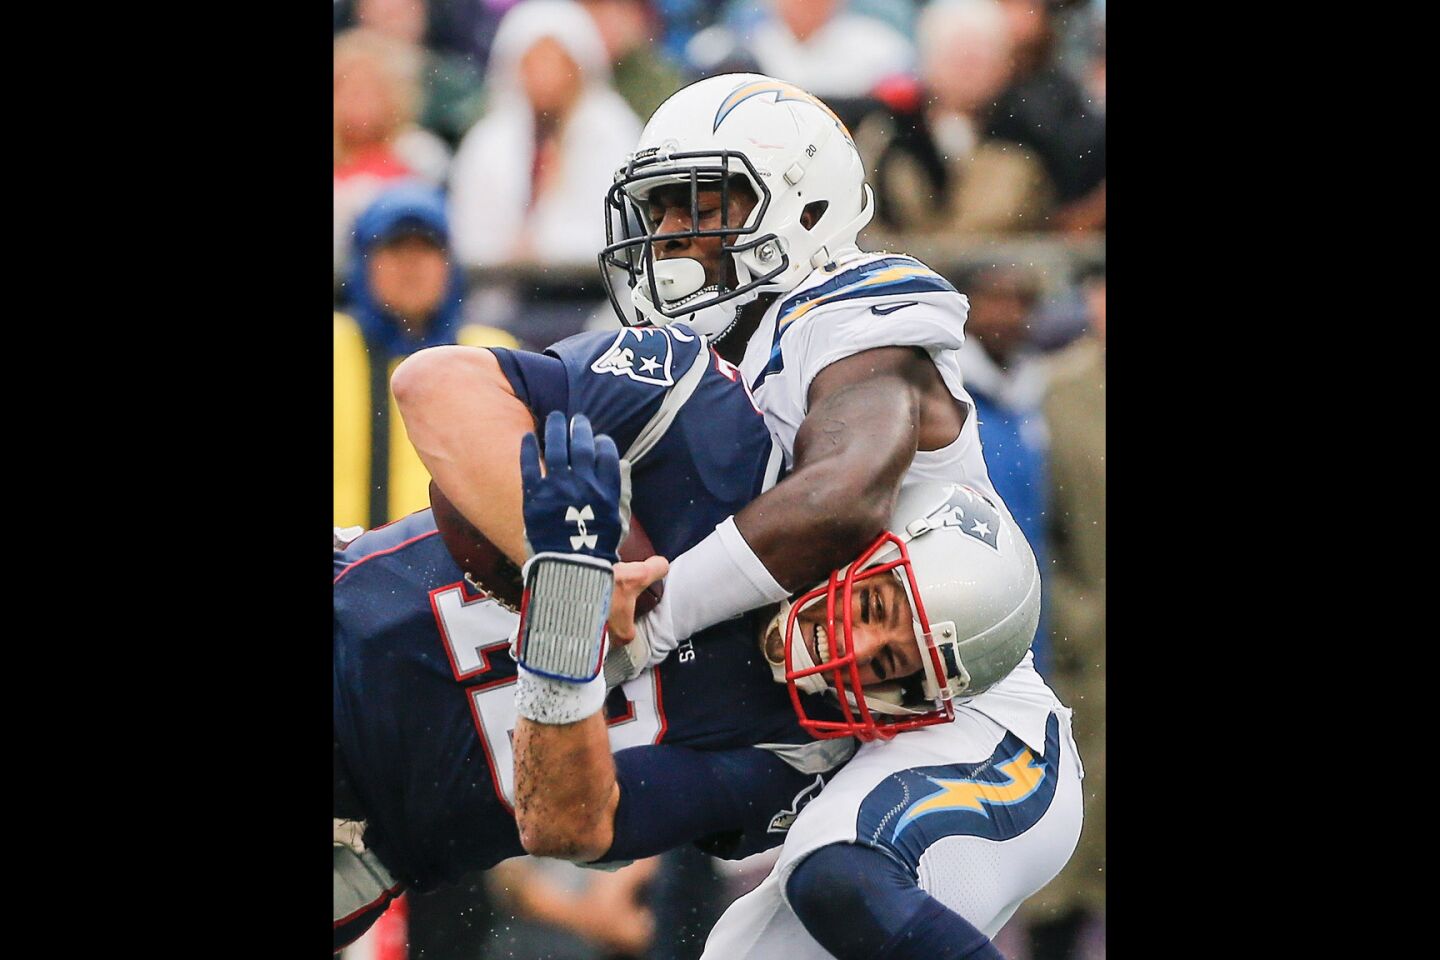 The Chargers' Desmond King tackles the Patriots' Tom Brady during the third quarter.